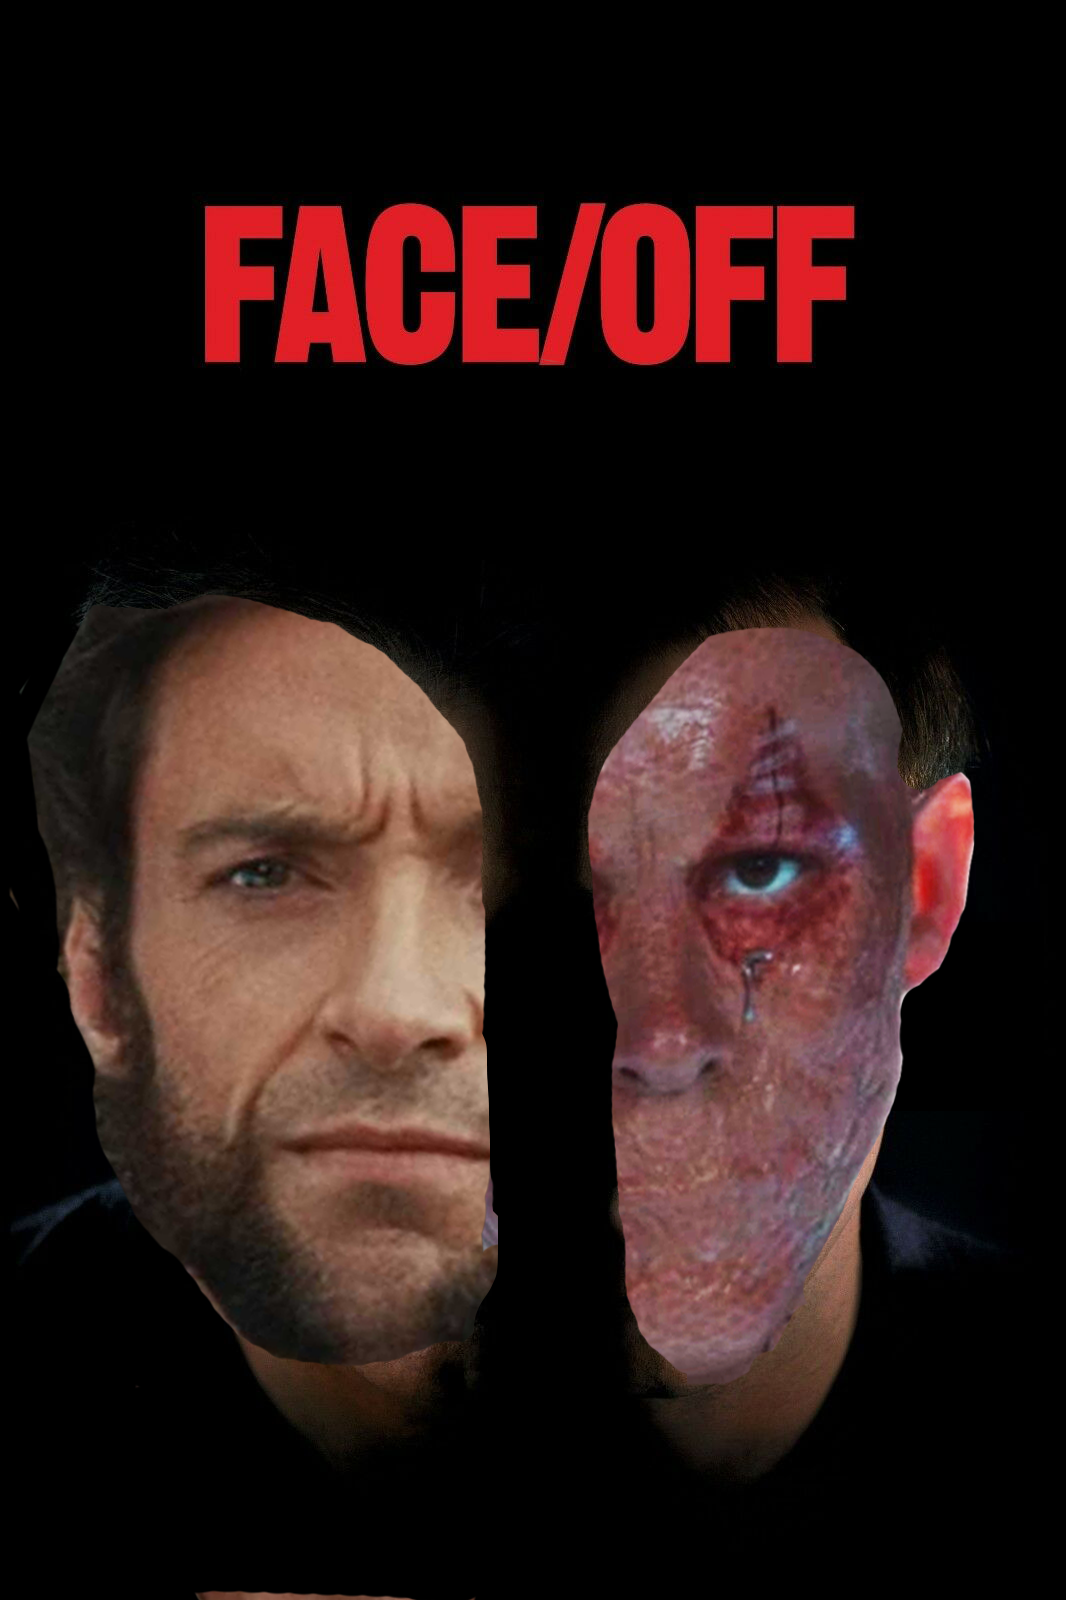 Hugh Jackman And Ryan Reynolds In A Face/Off Remake?